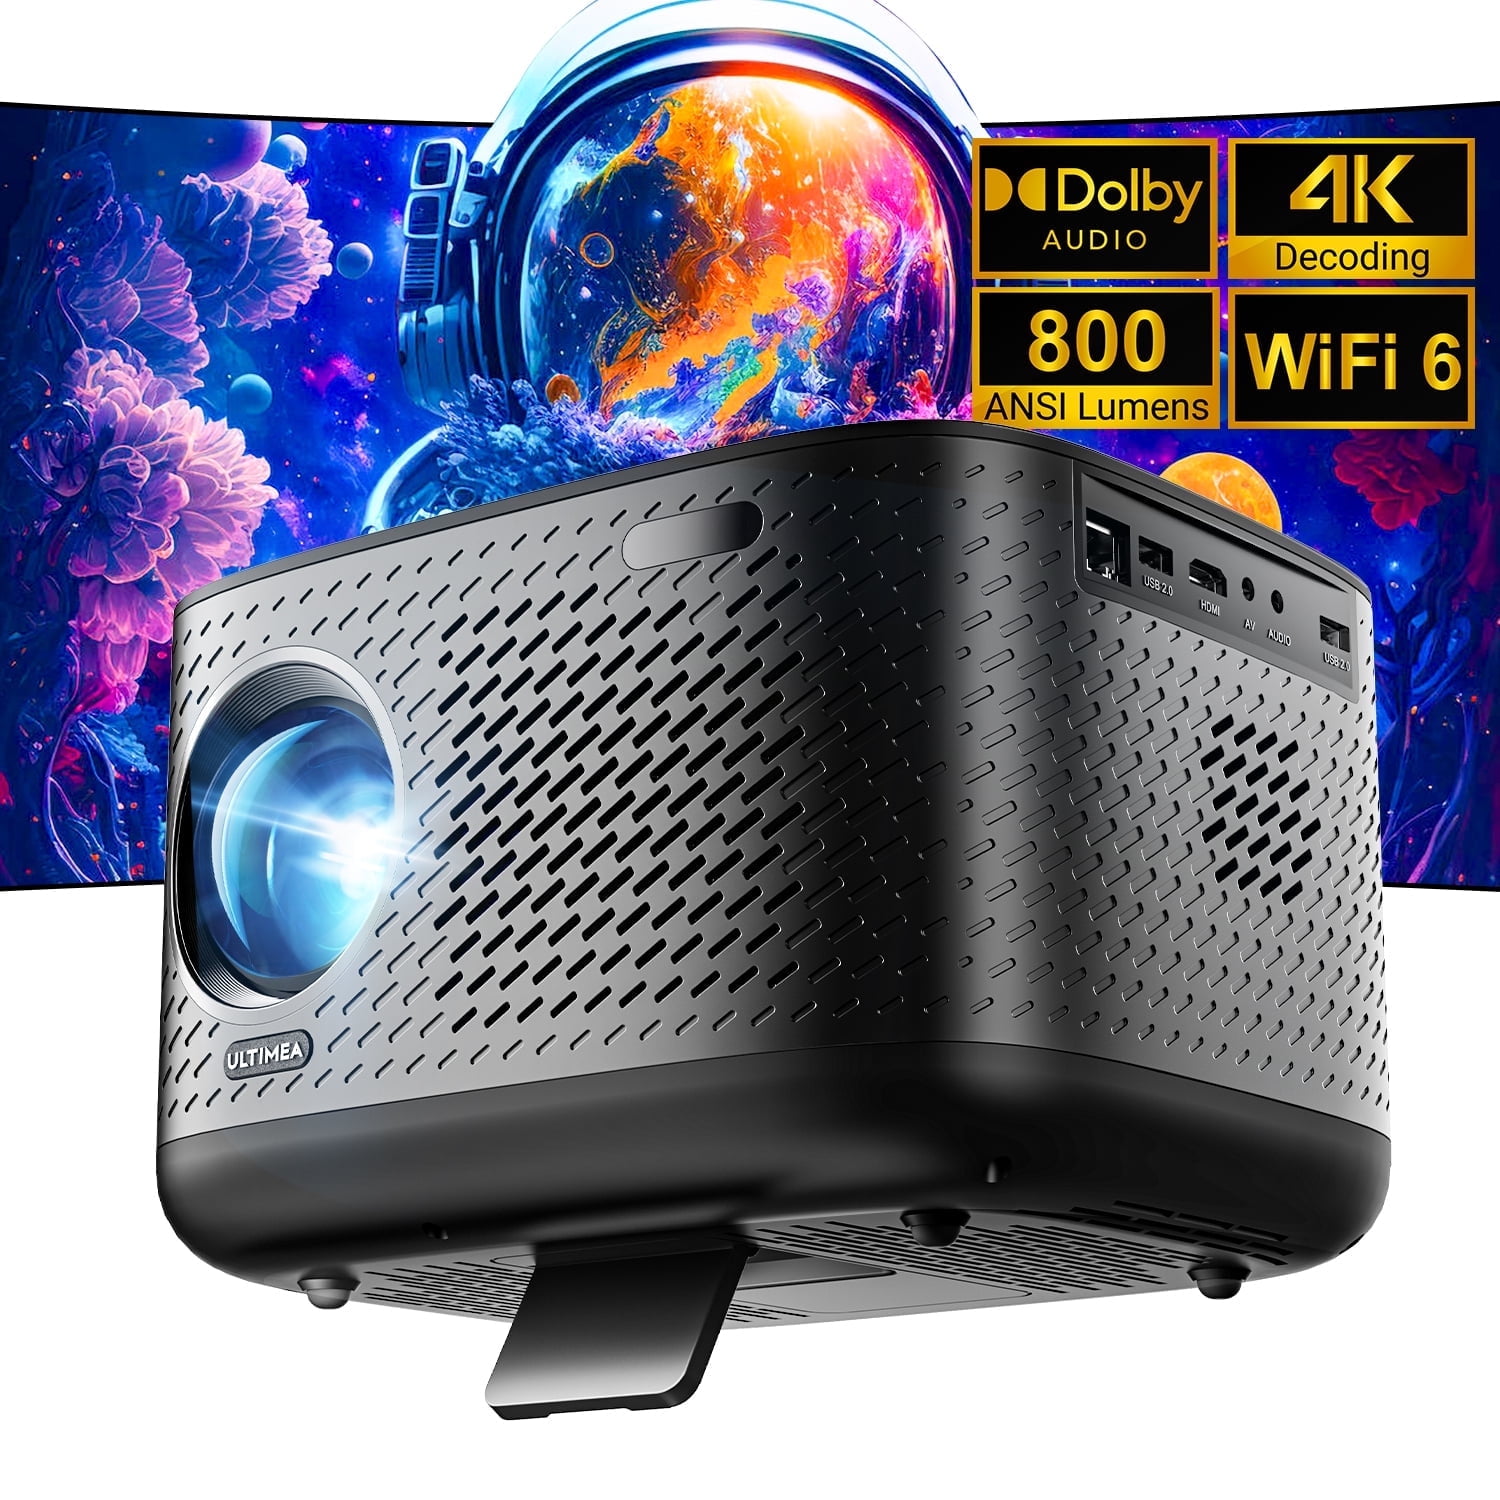 Xgody XI Movie Projectors With WIFI And Bluetooth, Android TV 9.0 Smart  Projector Built in APP, 1080P Native and 2300 Inch Display Supported, for  Home